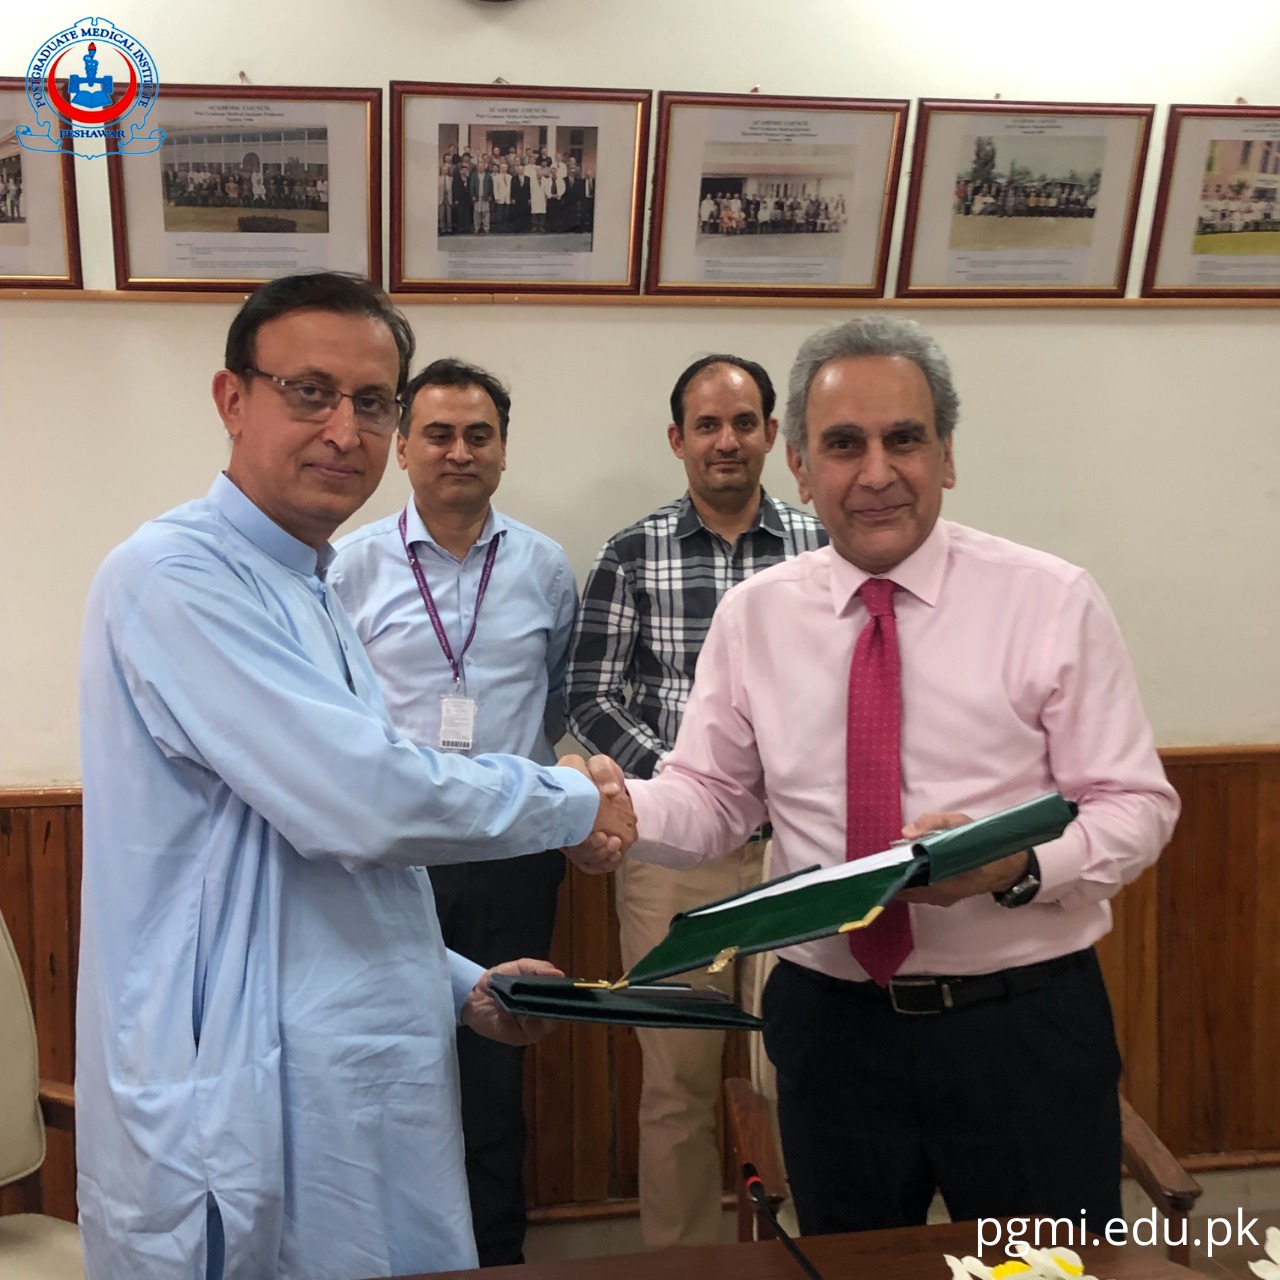 A memorandum of understanding (MoU) regarding the Basic Life Saver Course between the Skill Lab, PGMI, and the Rehman Medical Institute, was signed here at PGMI